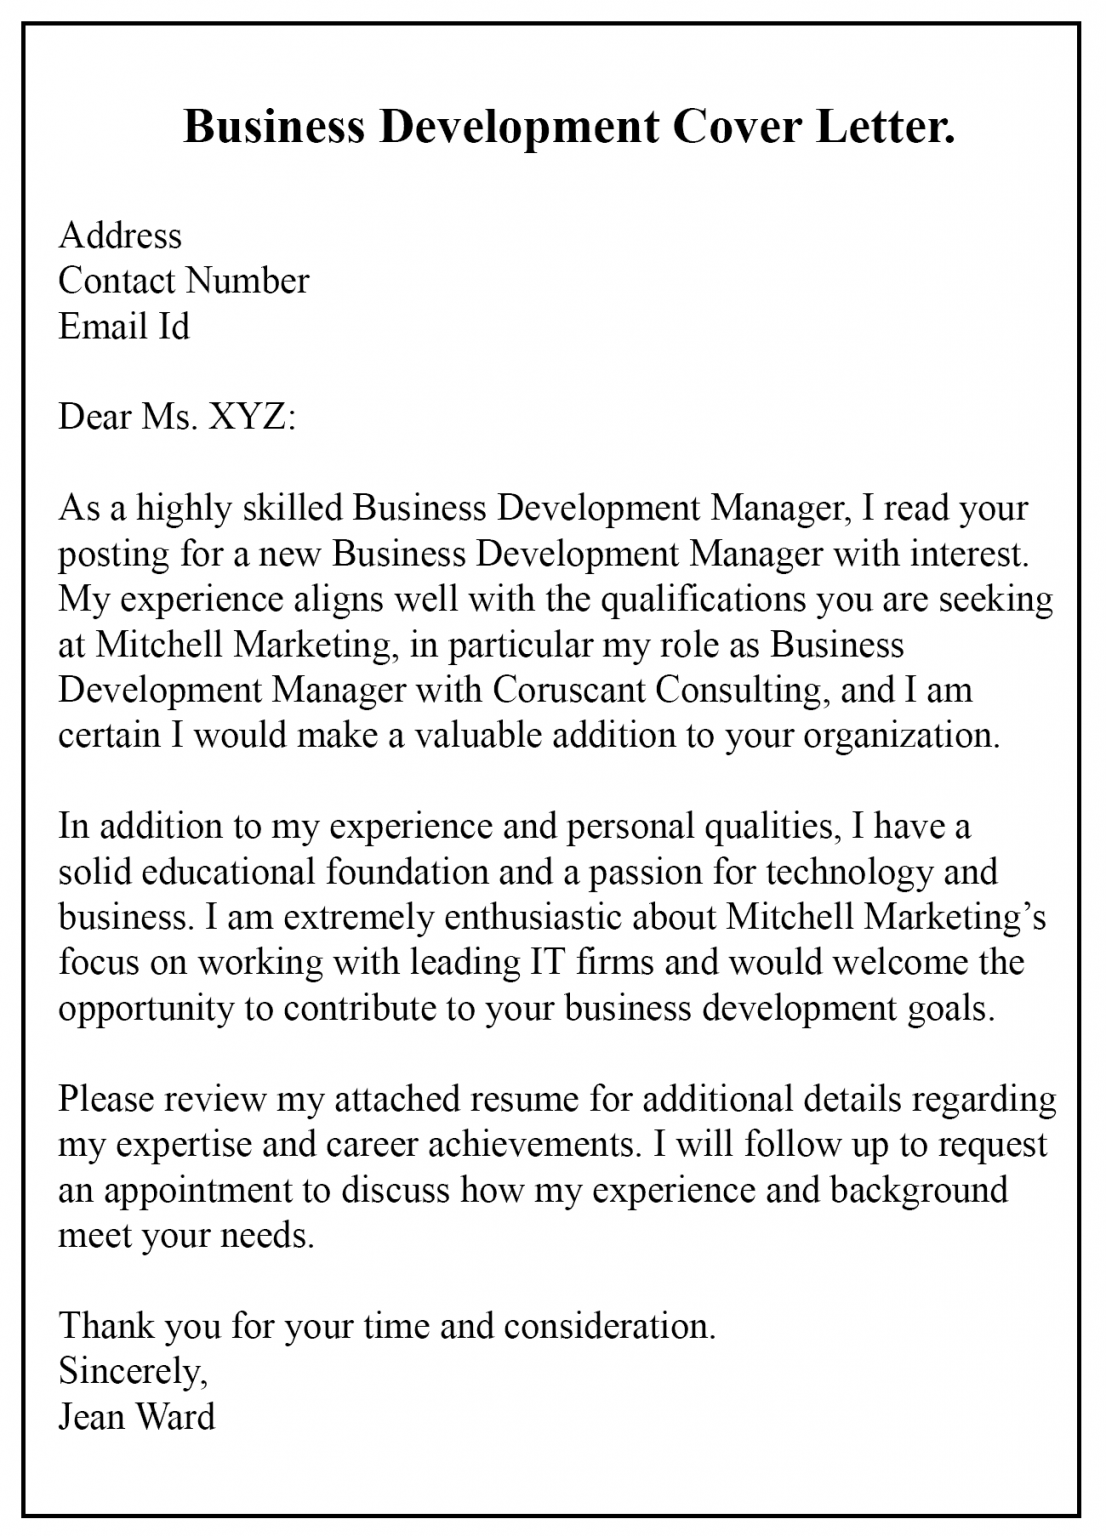 cover letter for business development manager assistant